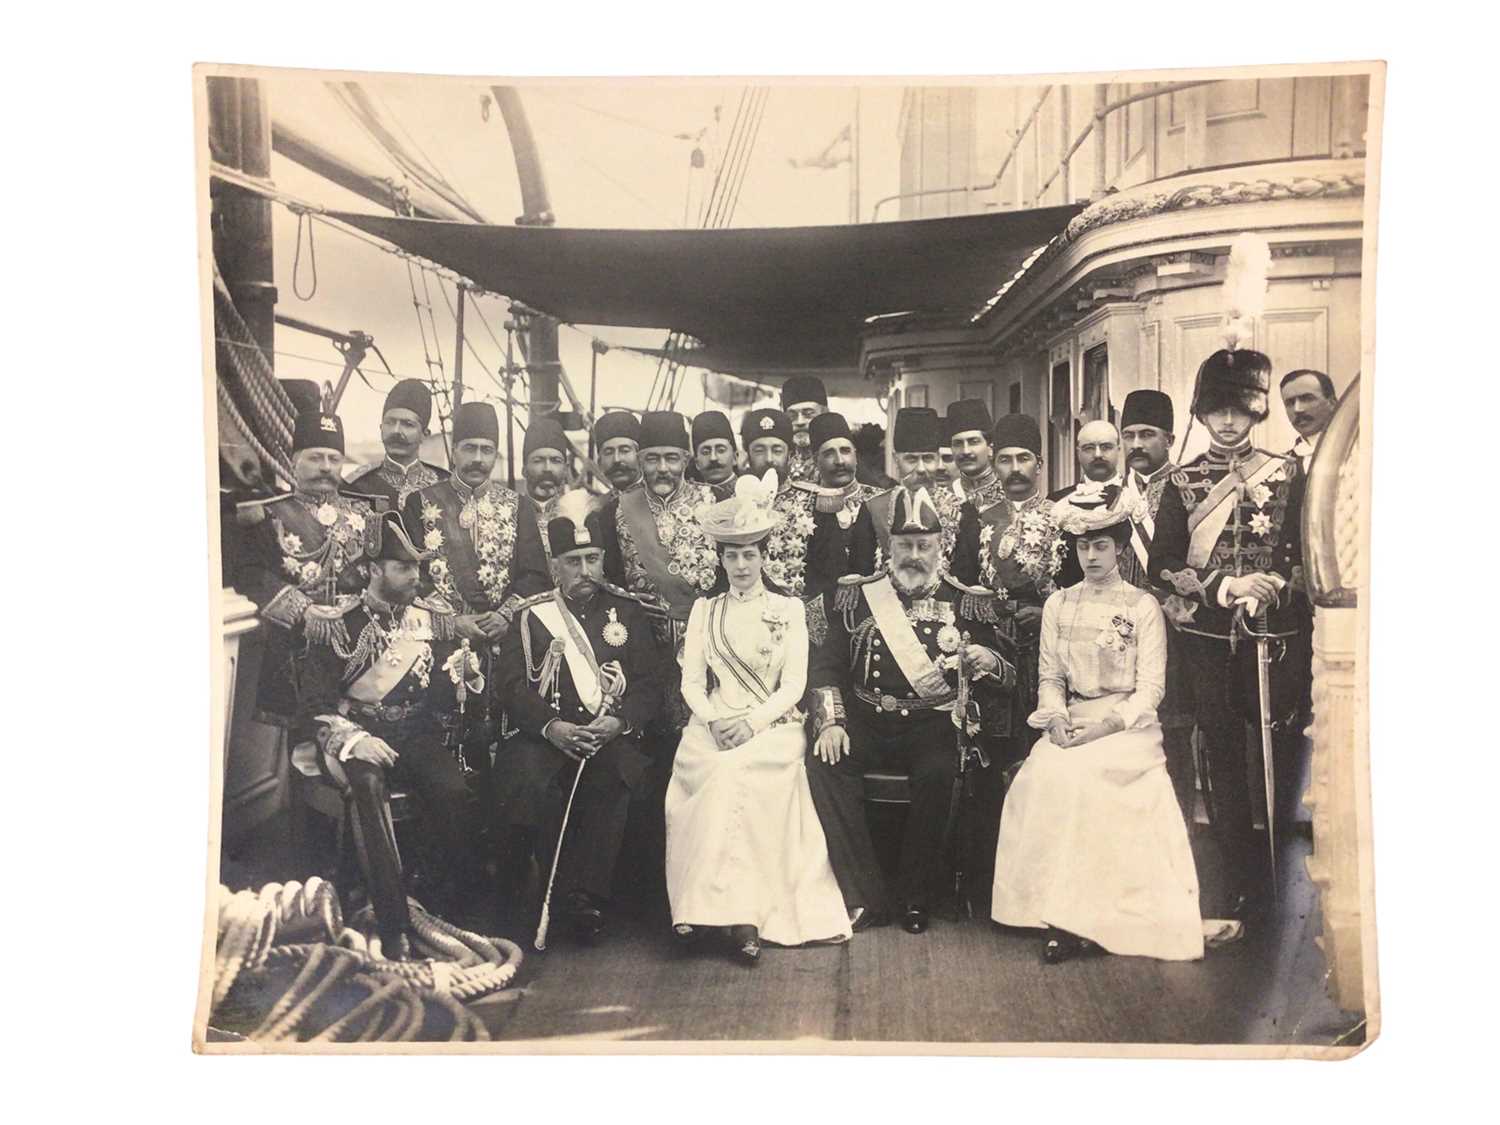 Lot 34 - H.M.King Edward VII and family, fine portrait photograph of The King and family entertaining The Shah of Persia and his entourage on board The Royal Yacht Victoria & Albert, Portsmouth 18th August...